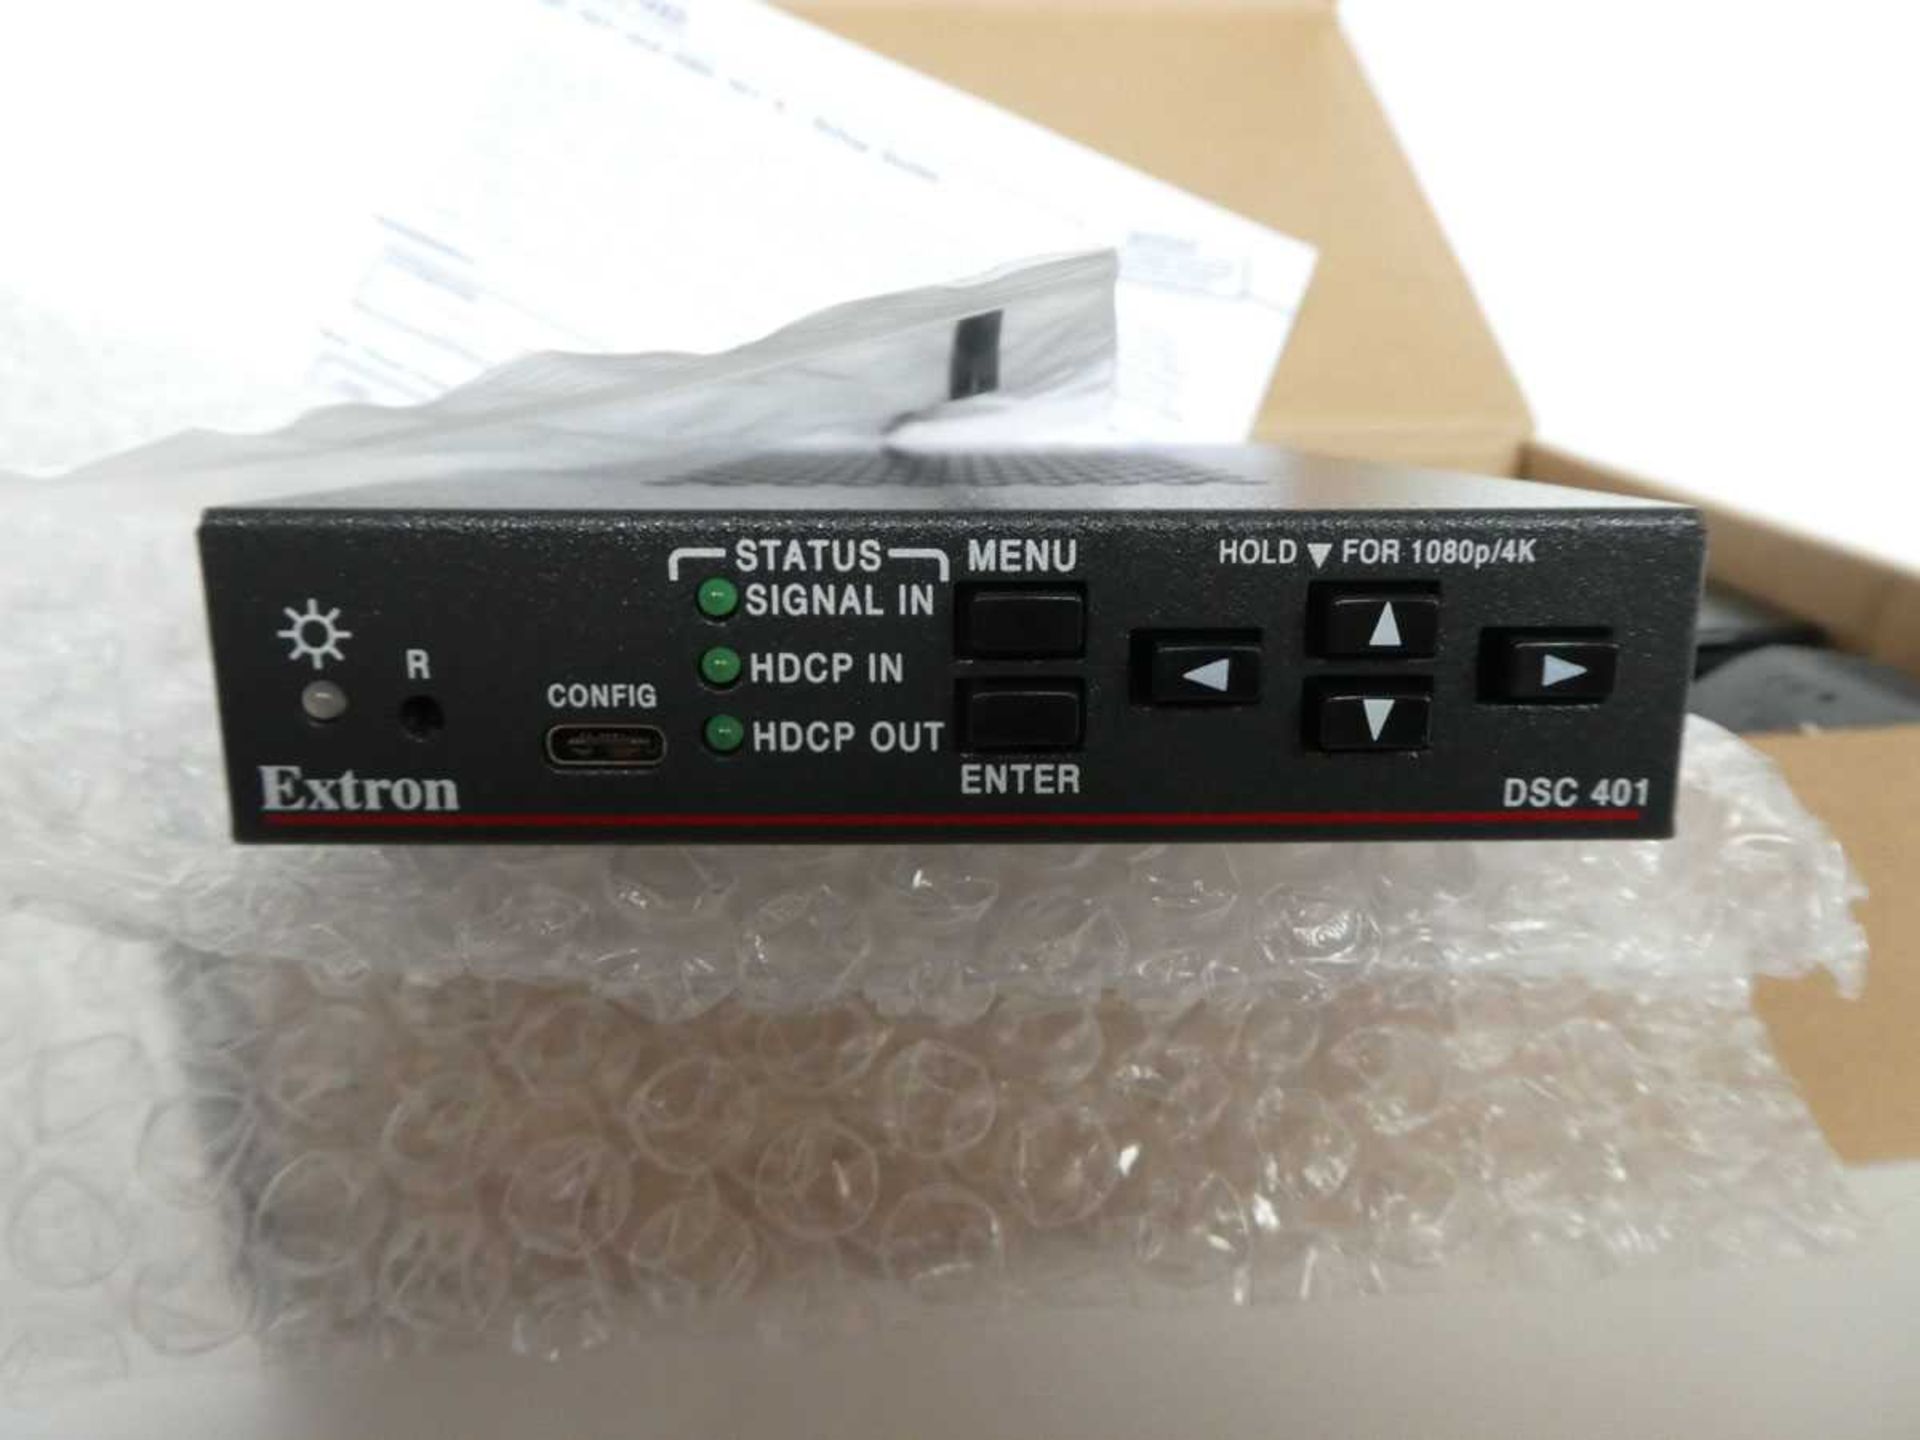 +VAT Extron DSC 401 HDMI to HDMI scaler in box with power supply - Image 2 of 4